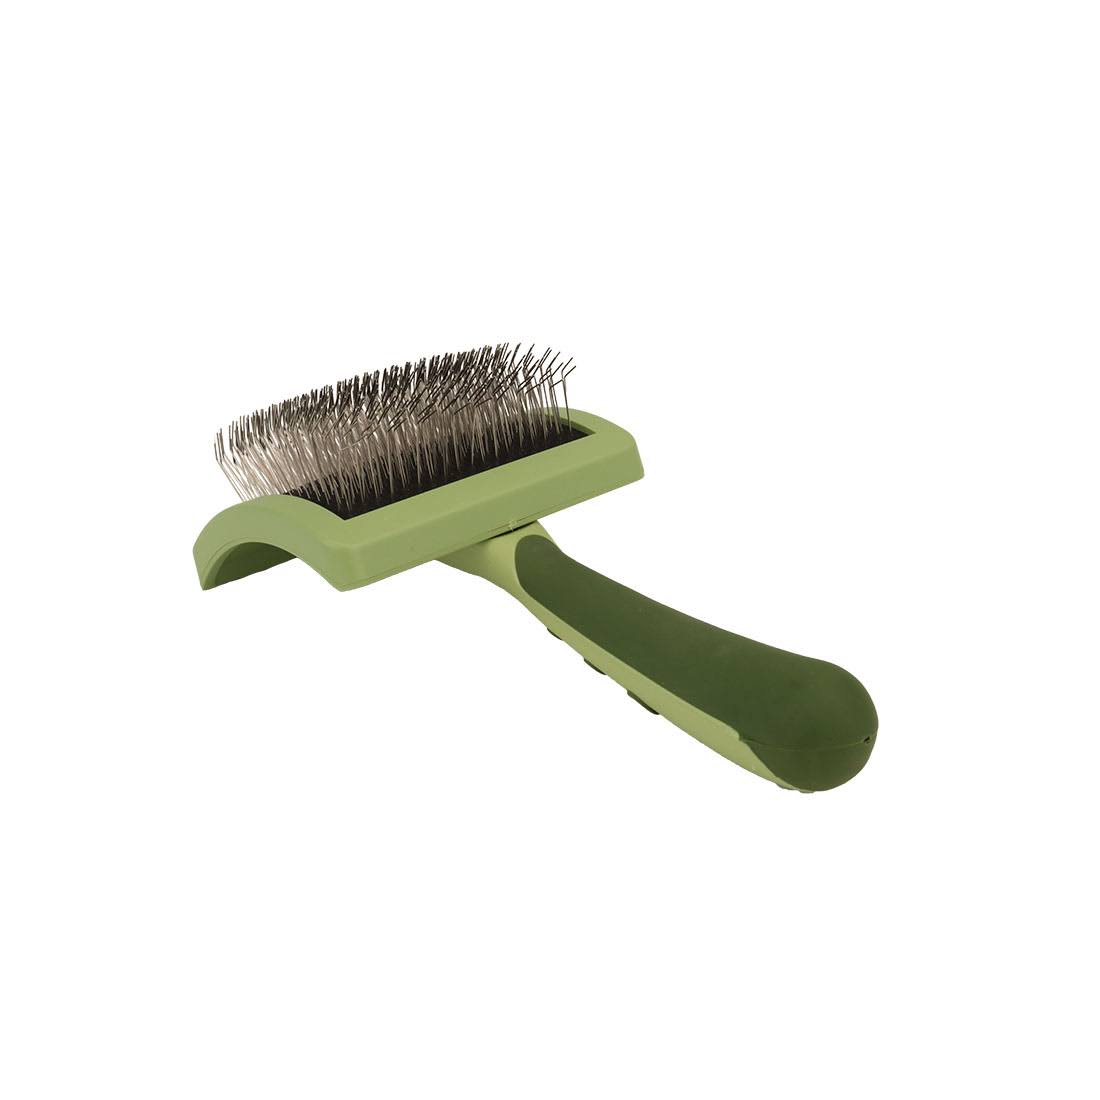 Safari Curved Firm Slicker Brush with Coated Tips for Long Hair (Size: Medium)